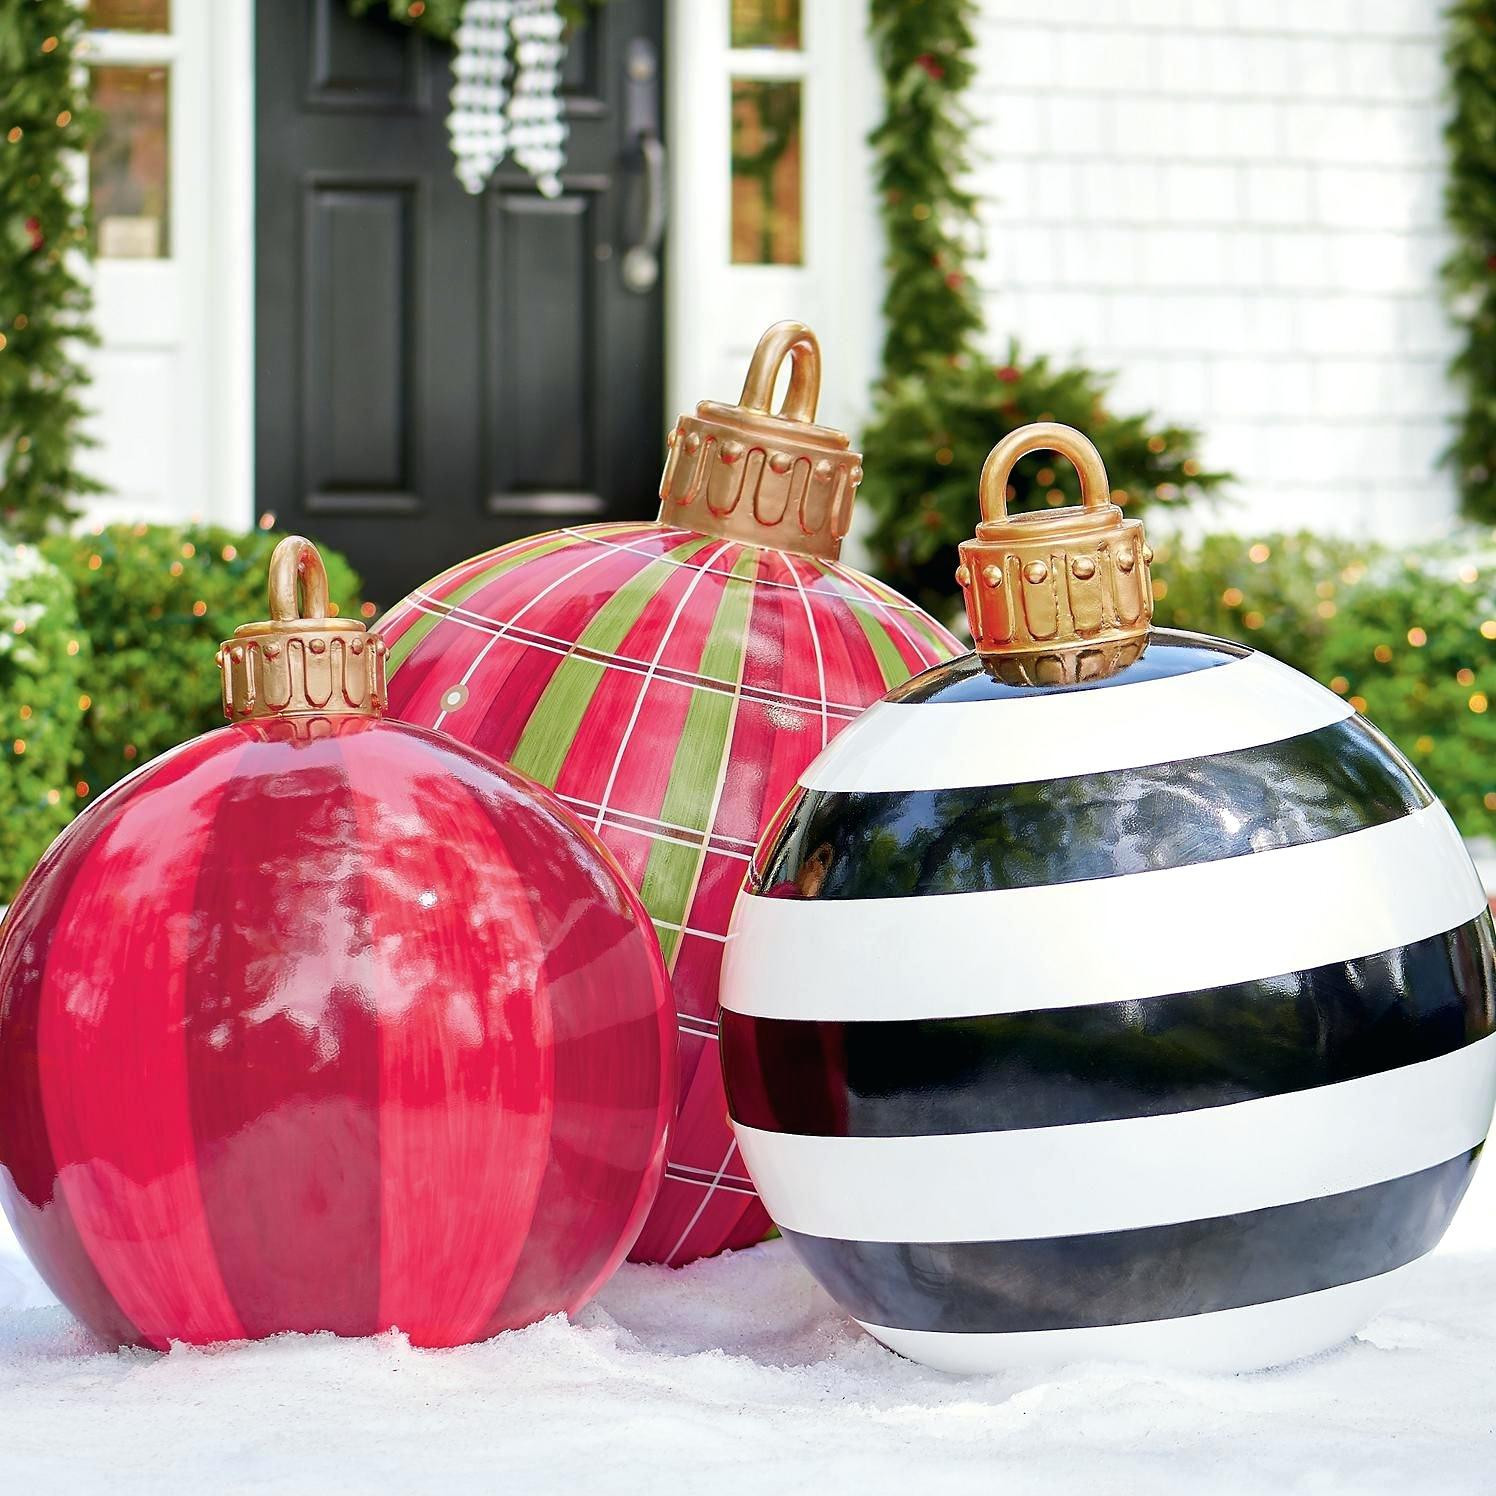 Outdoor Christmas Balls
 Cheap And Easy Outdoor Giant Christmas Ornaments That Are